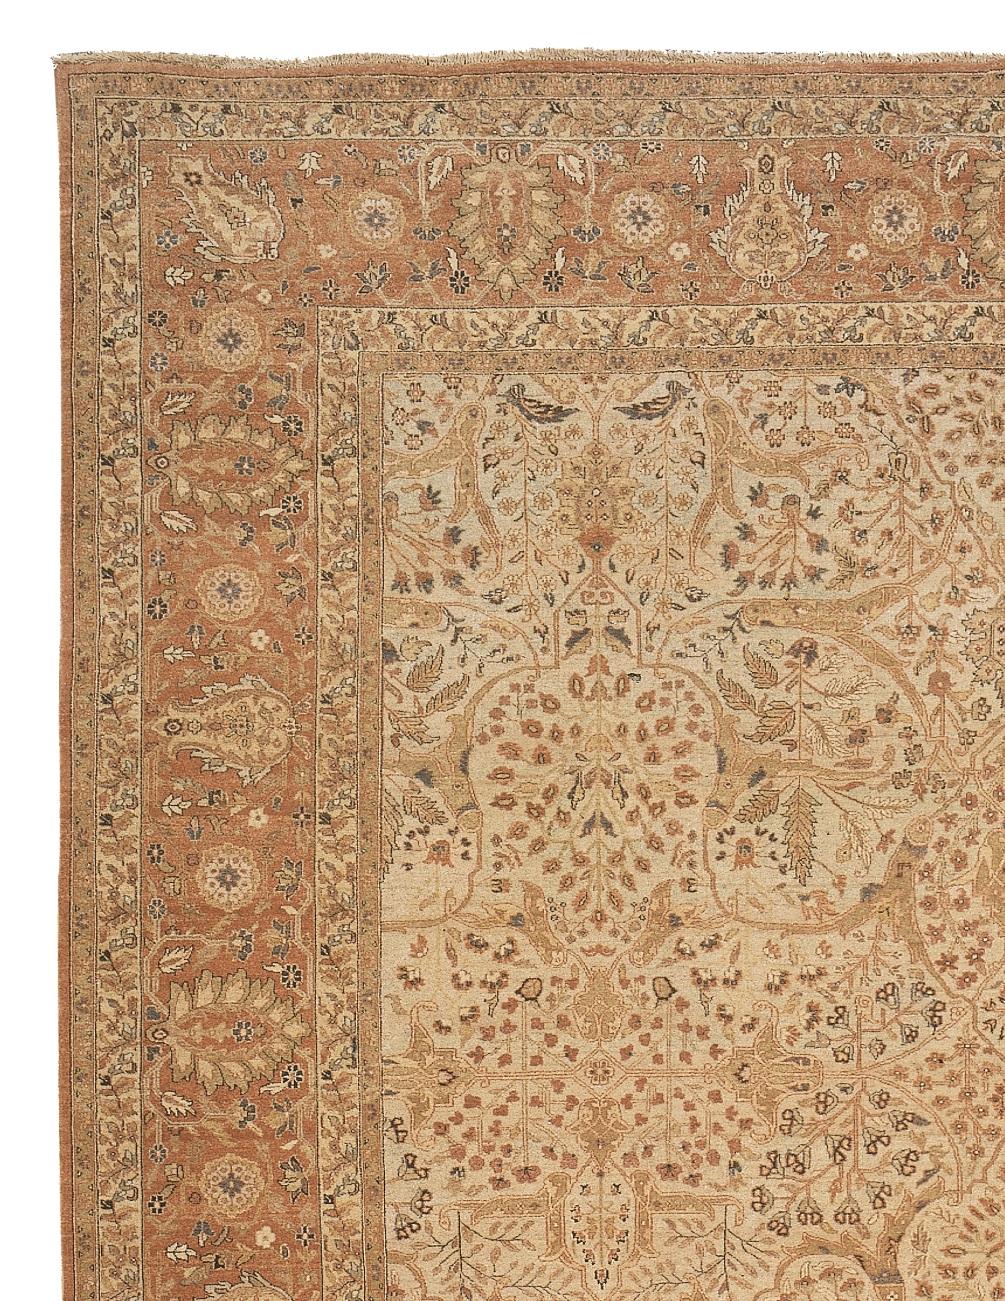 Key characteristics

Faithfully reviving the historical pieces of yesteryear, we offer a signature collection of carpets that mirror the original masterworks. Woven Concepts has dedicated great care to capture the essence of the original carpets it